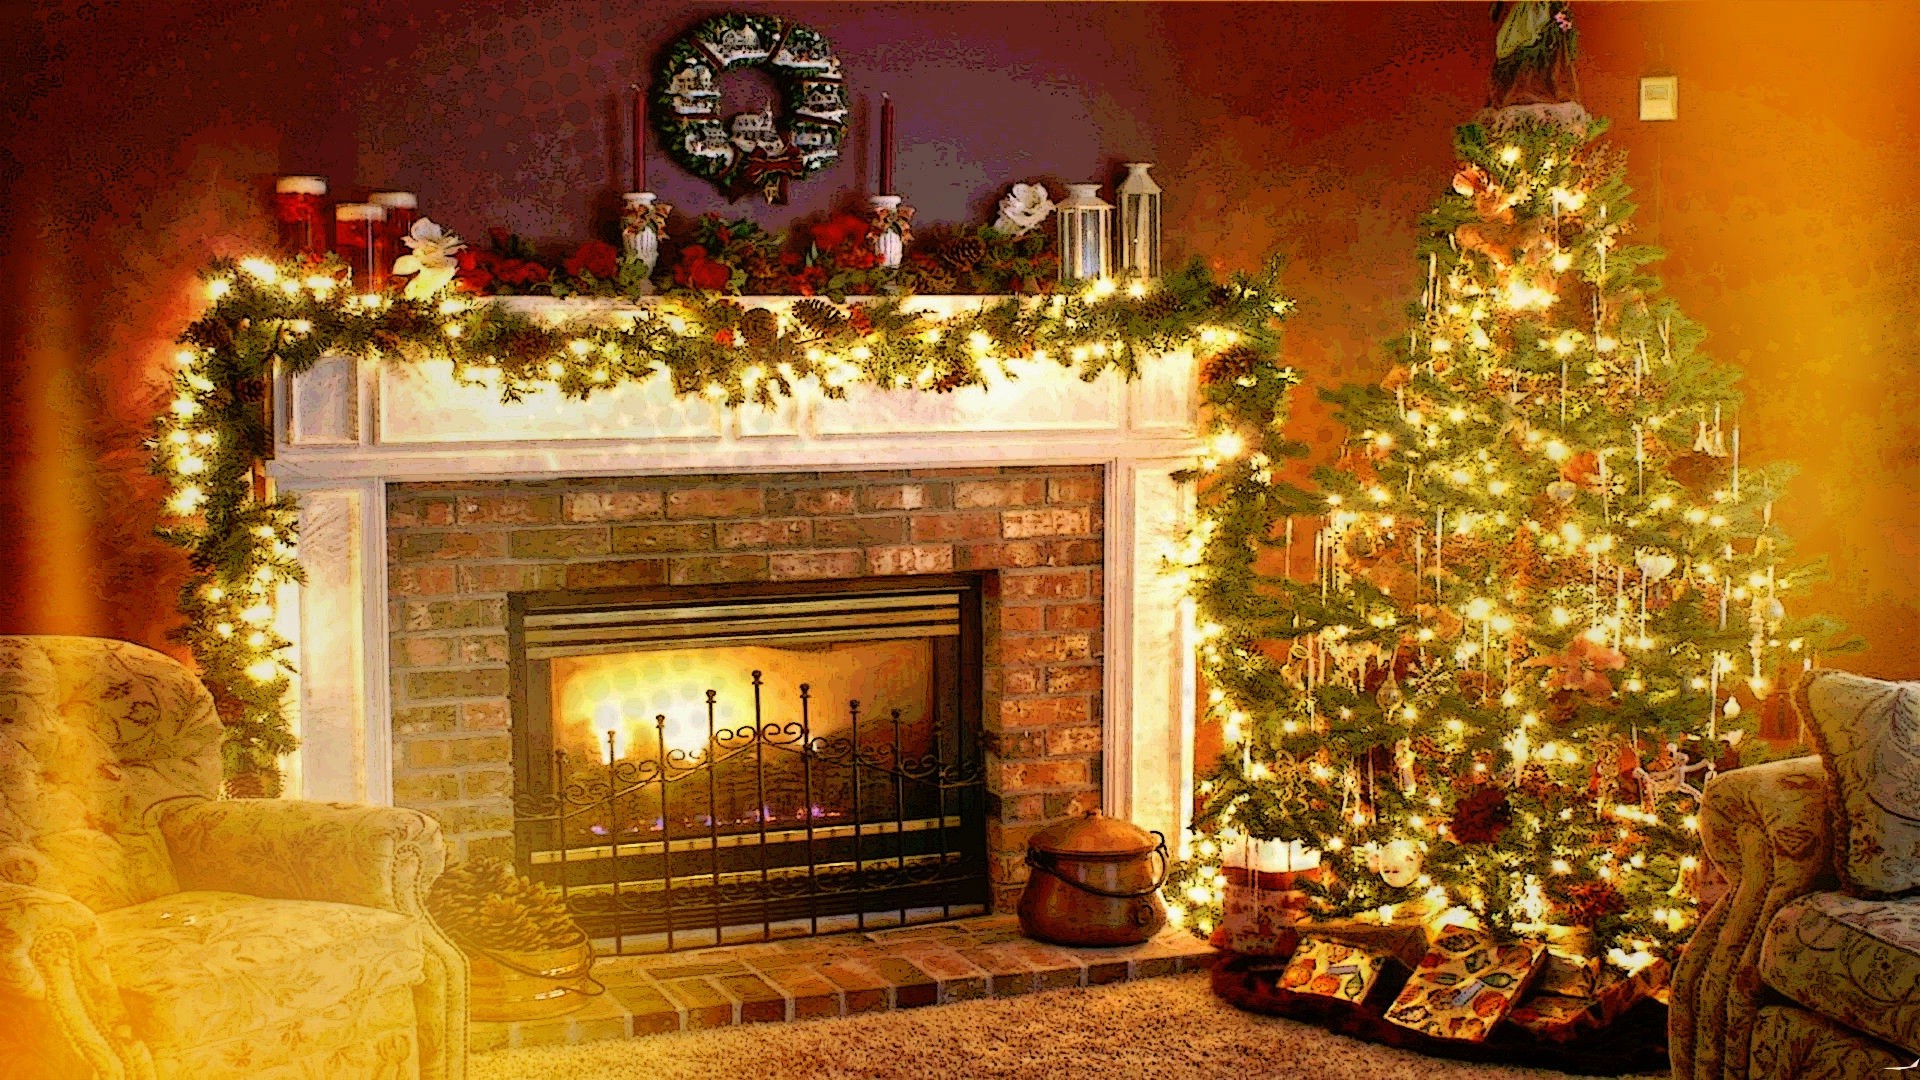 Christmas Holiday Fireplace Interiors Wele Home Wallpaper